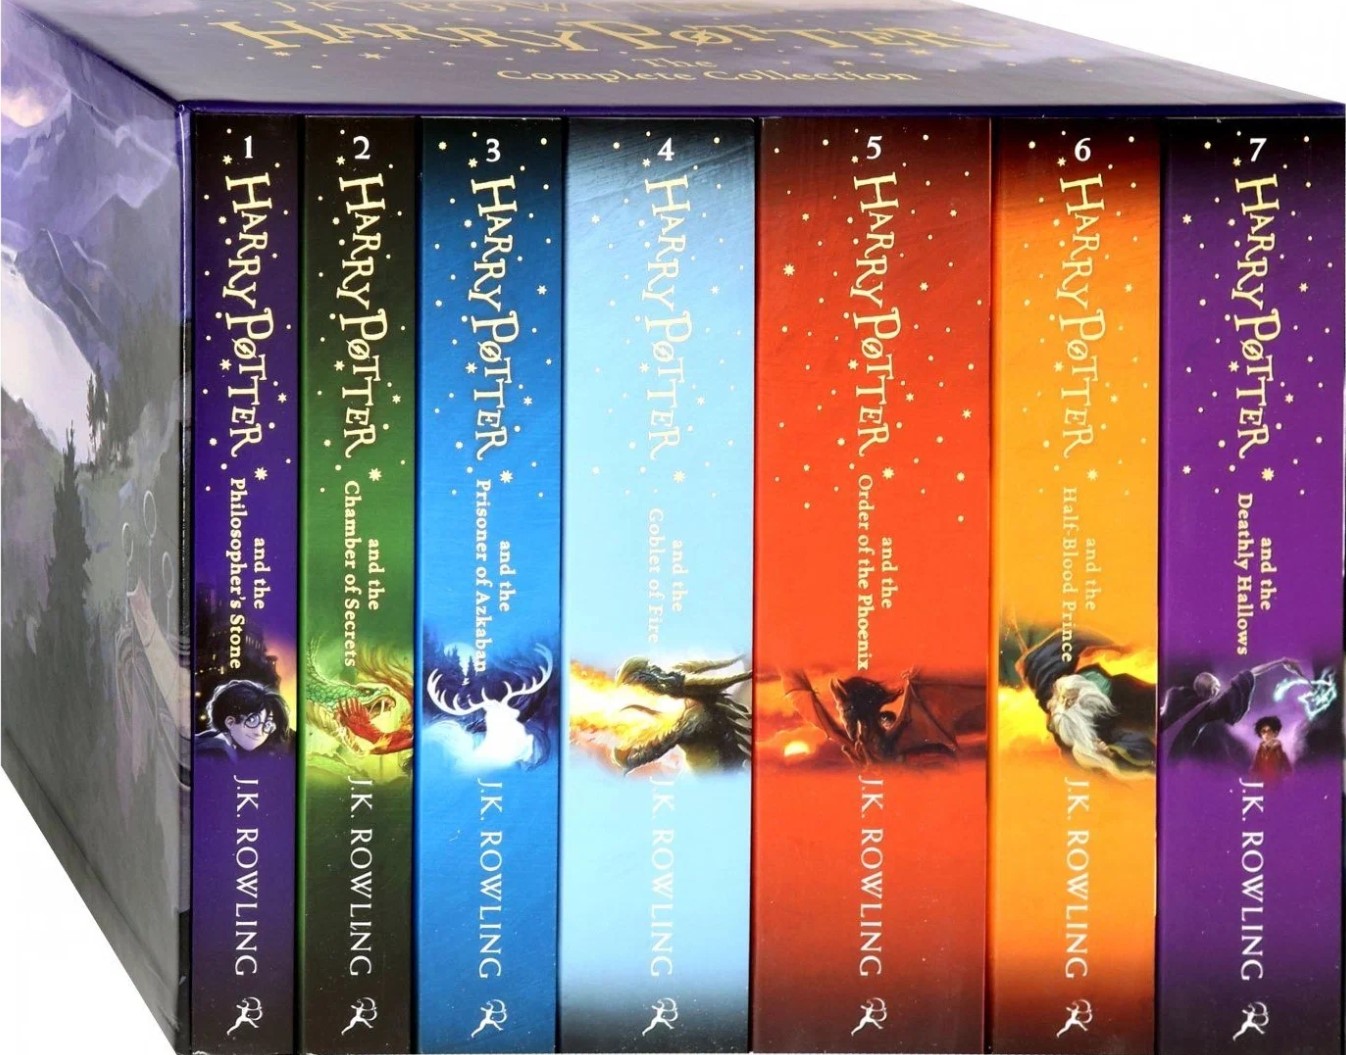 Rowling J.K. Harry Potter Box Set: The Complete Collection (Childrens Paperback) 